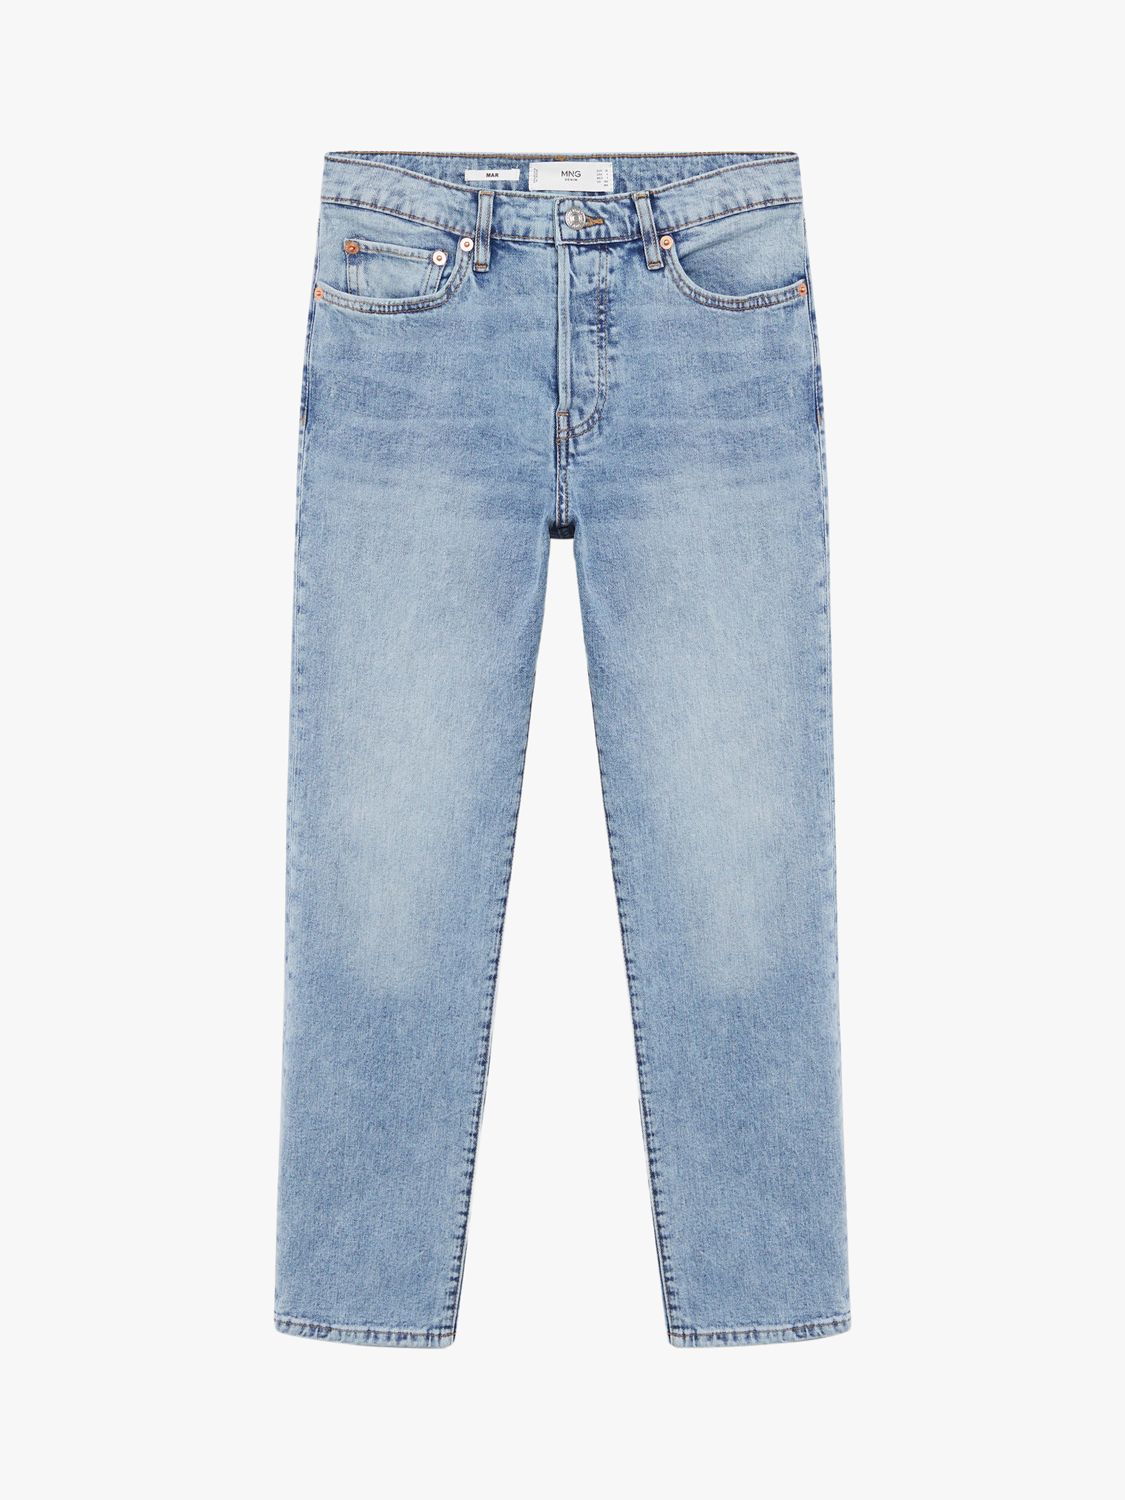 Mango Ankle Length Straight Fit Jeans